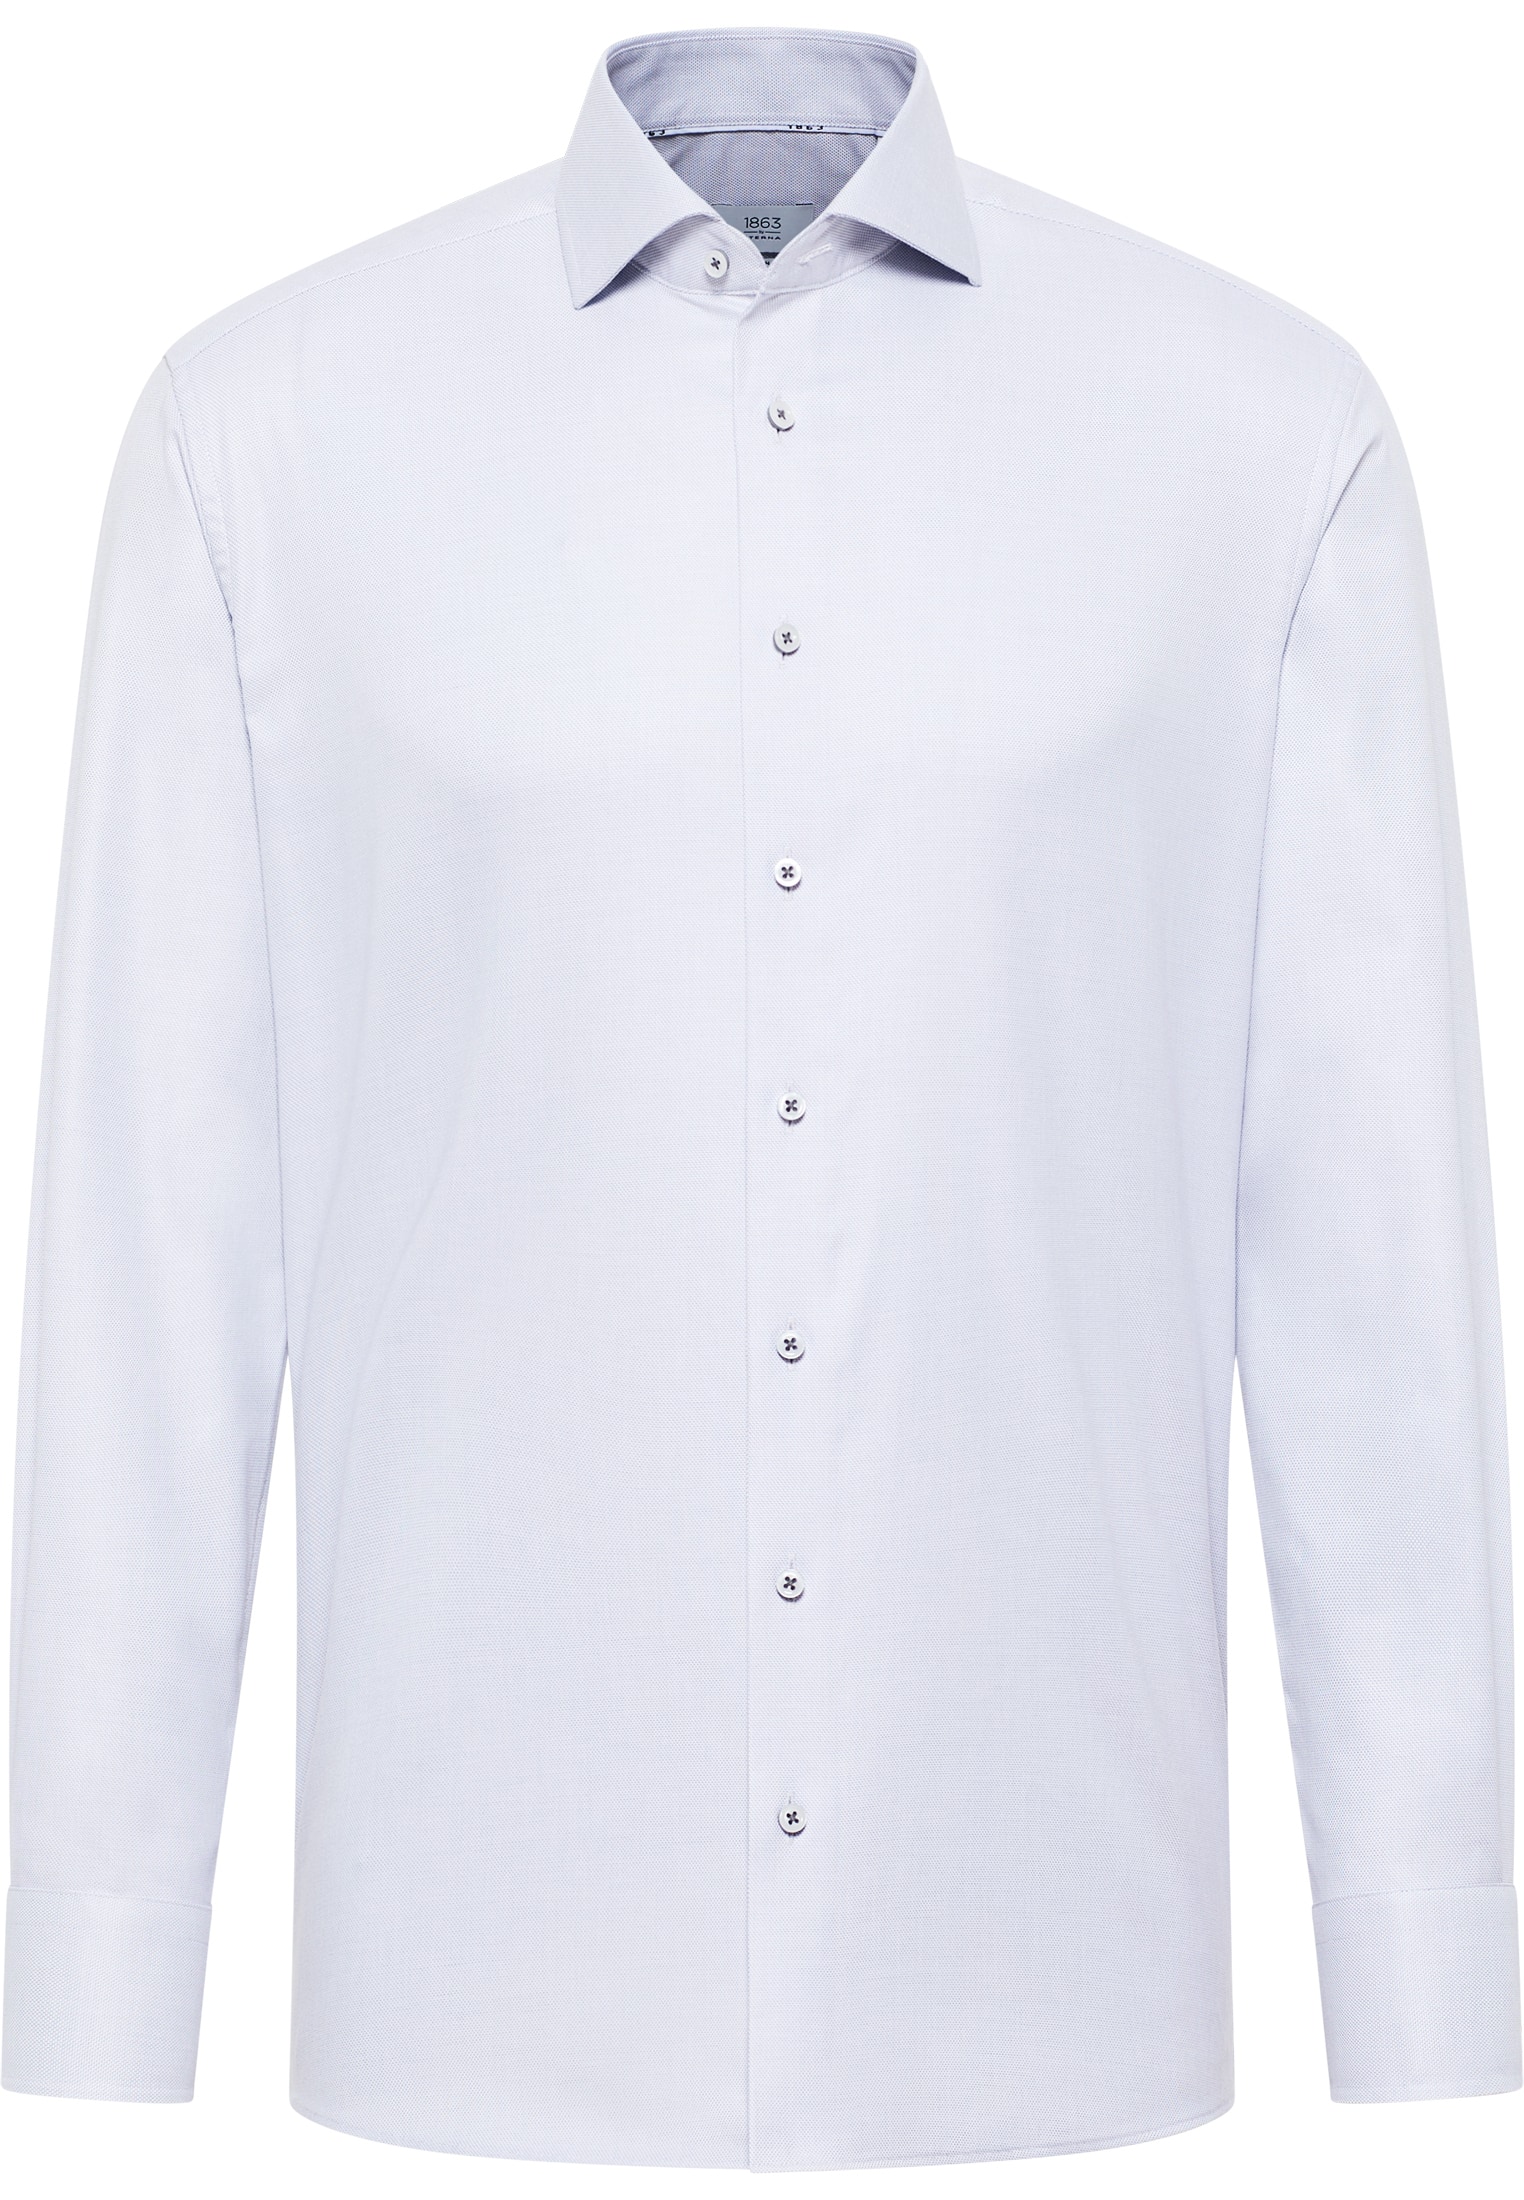 MODERN FIT Shirt in light grey structured